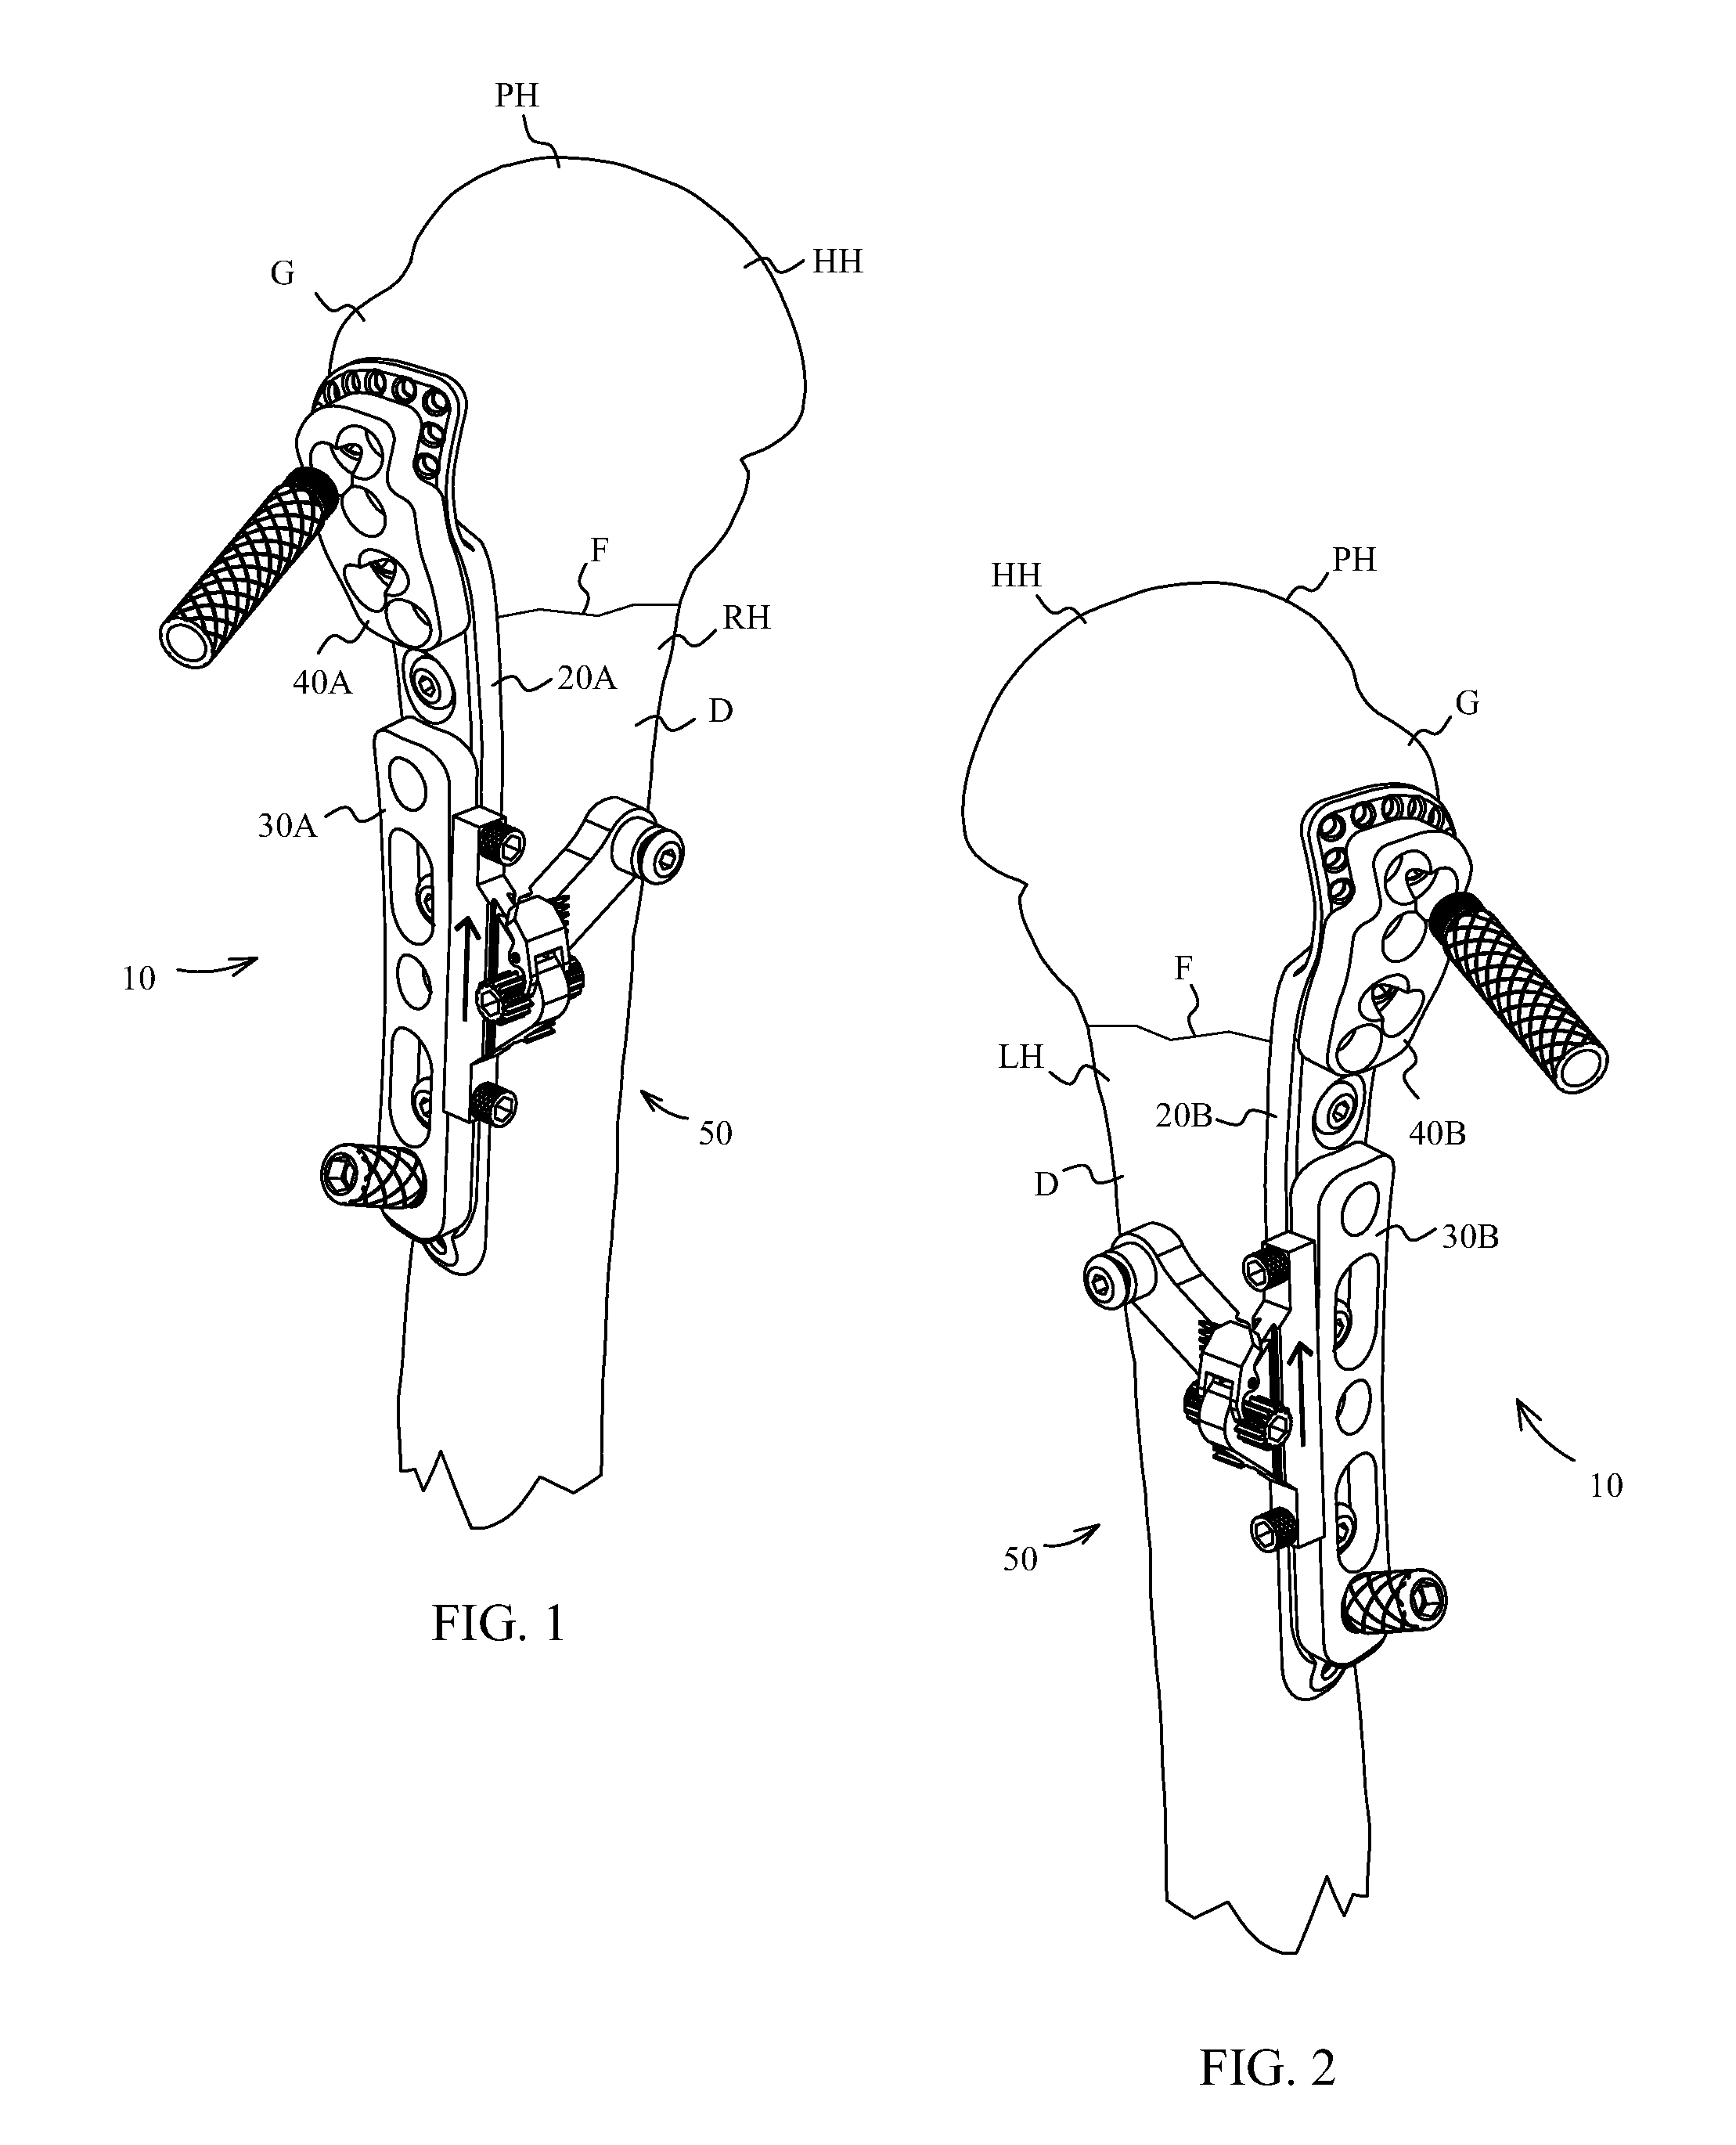 Proximal humerus fracture repair plate and system